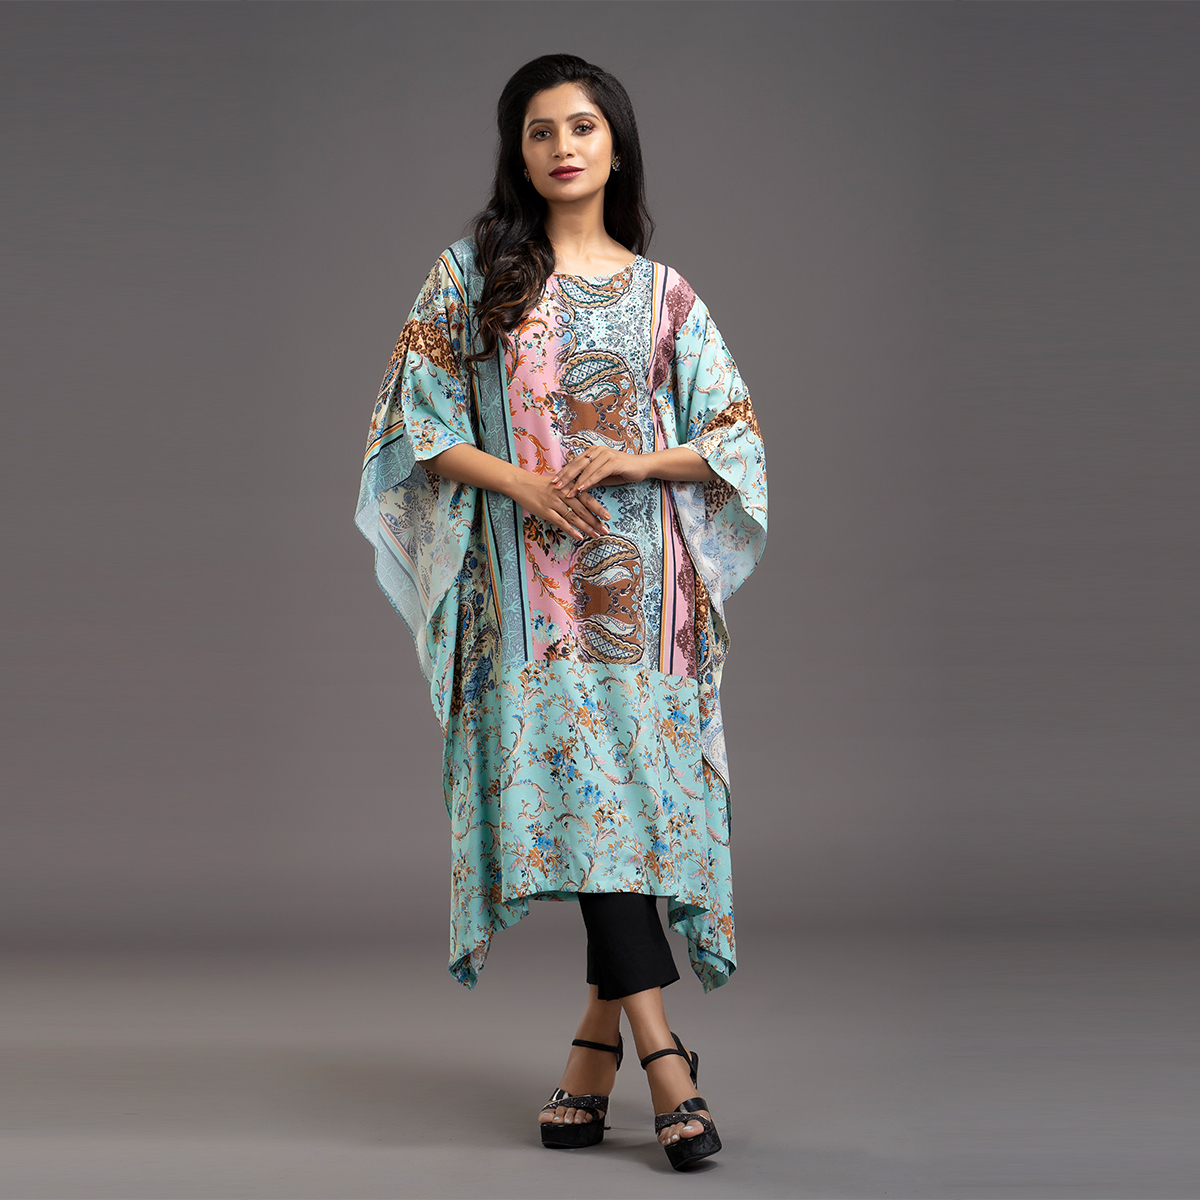 Zella Boat neck Rayon Printed Kafthan with embellishments - Sky Blue